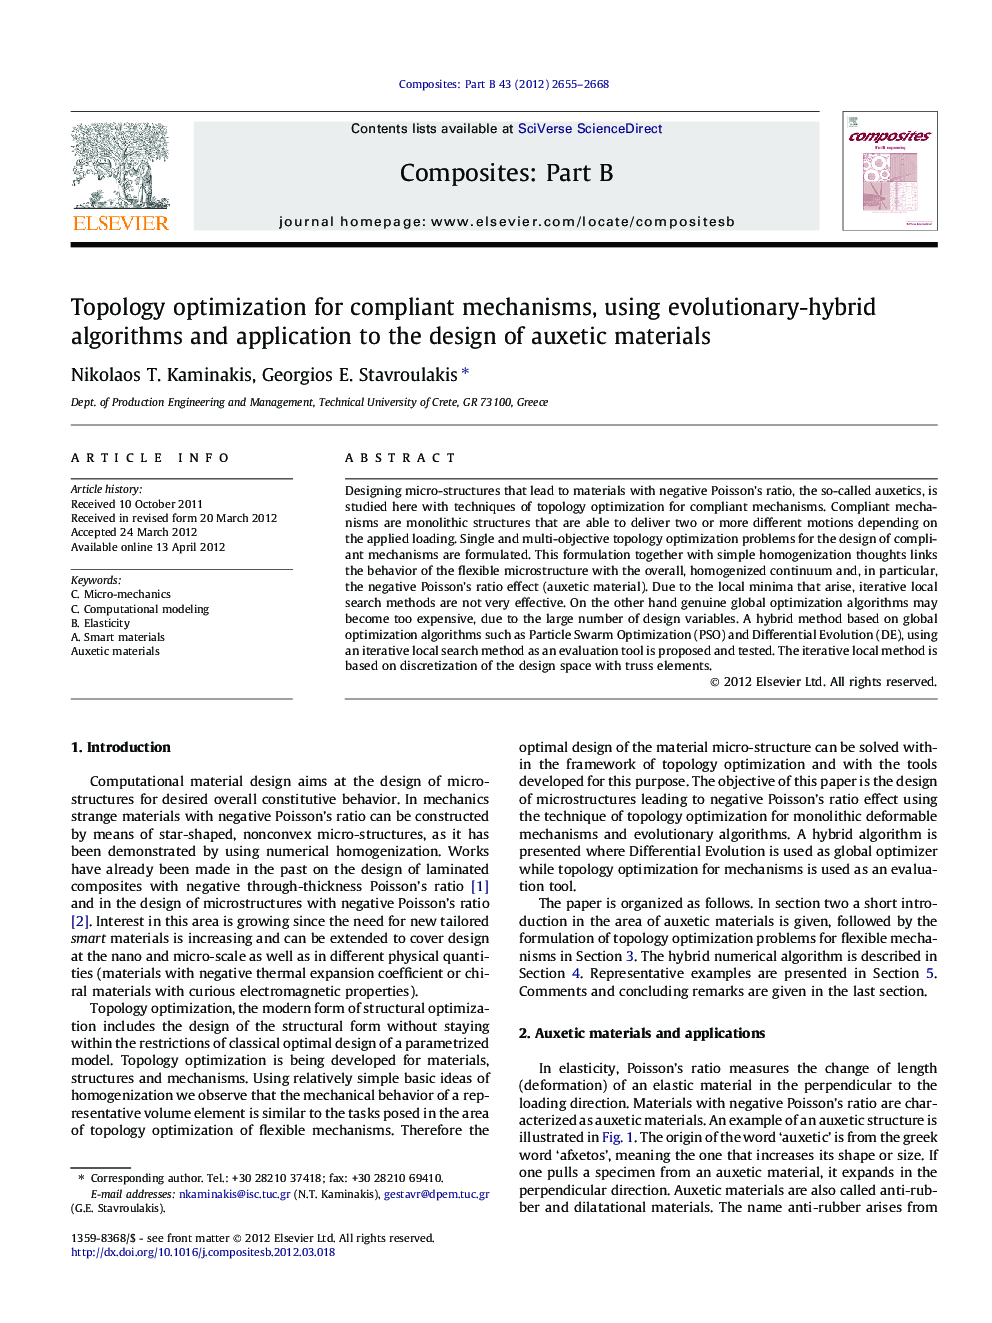 Topology optimization for compliant mechanisms, using evolutionary-hybrid algorithms and application to the design of auxetic materials